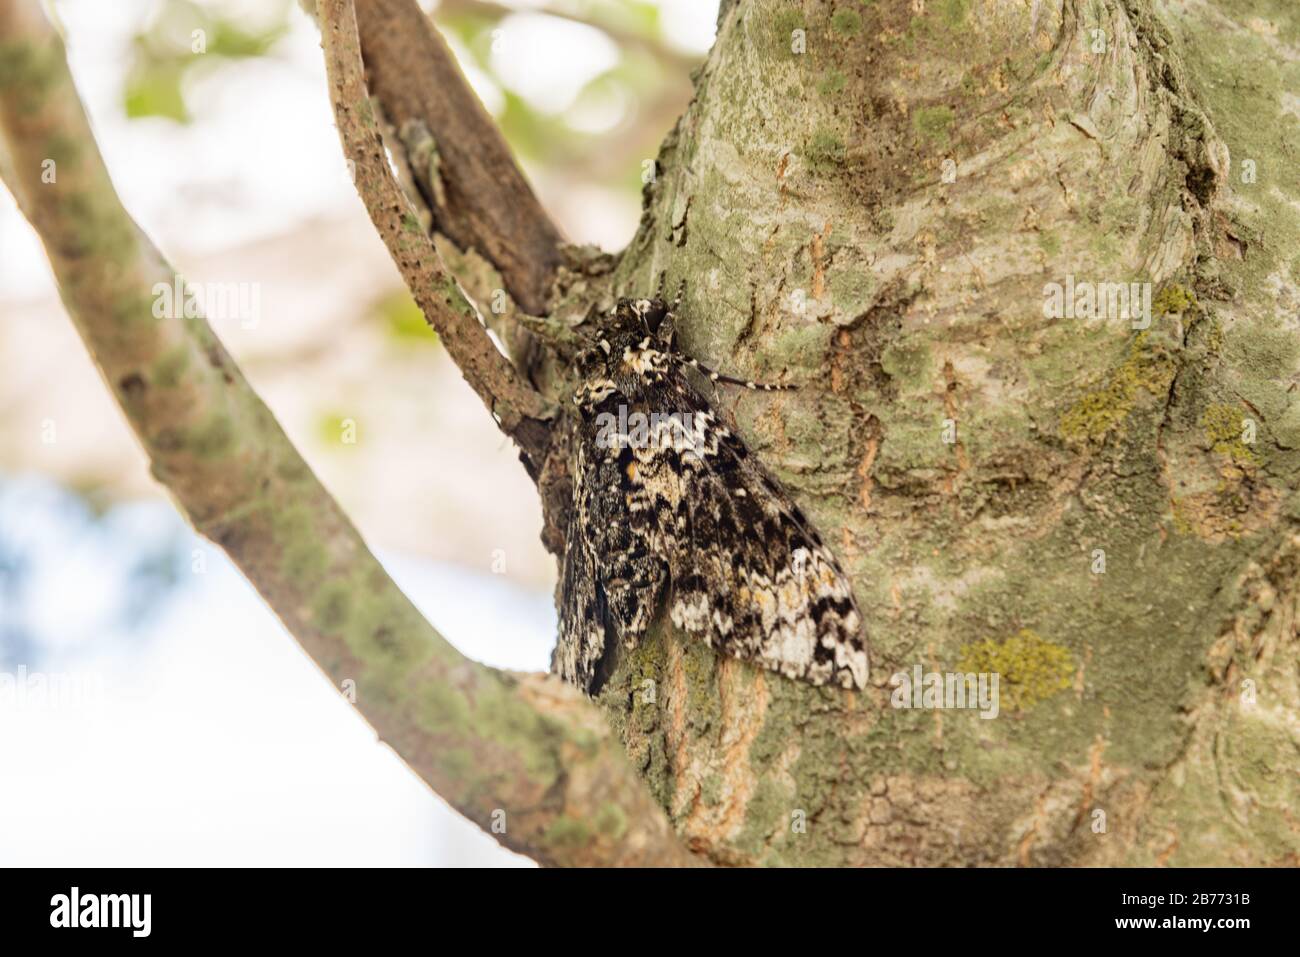 Camouflage moth perched on bark tree Stock Photo